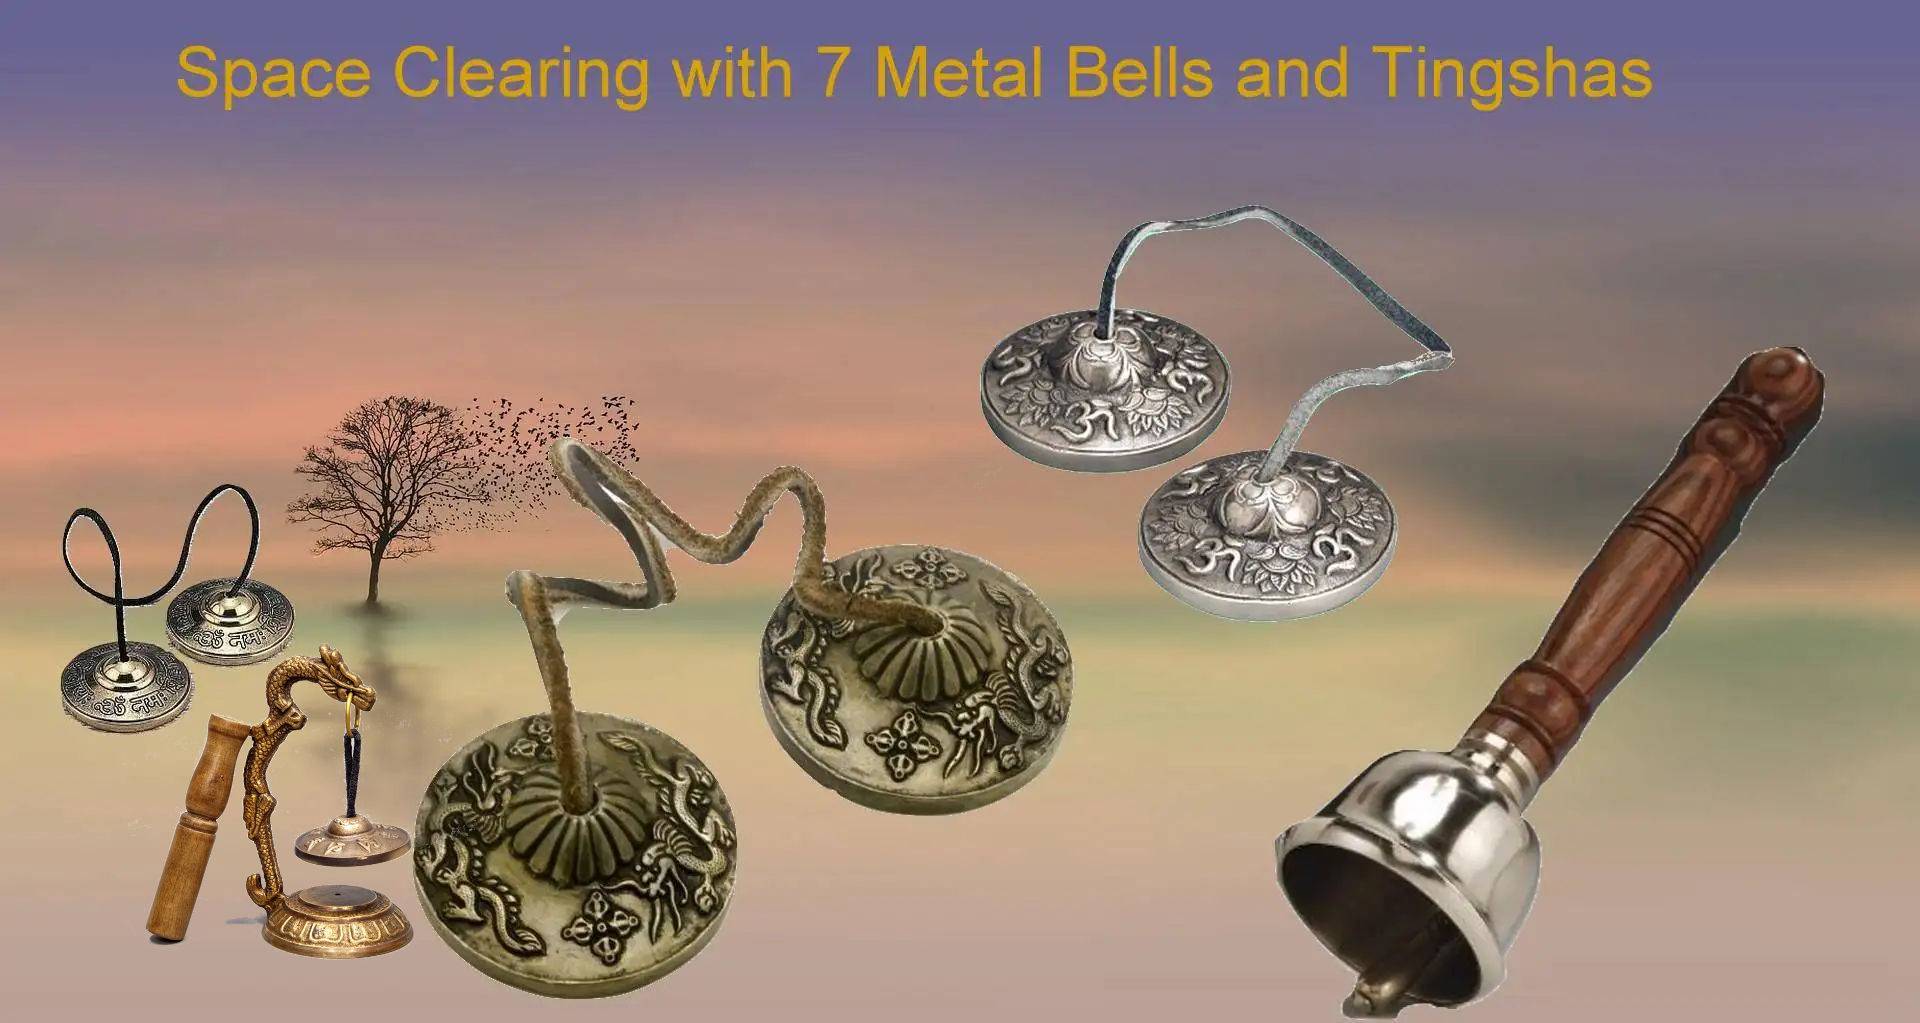 Dragon gong, tingshas, space, cleaning bell